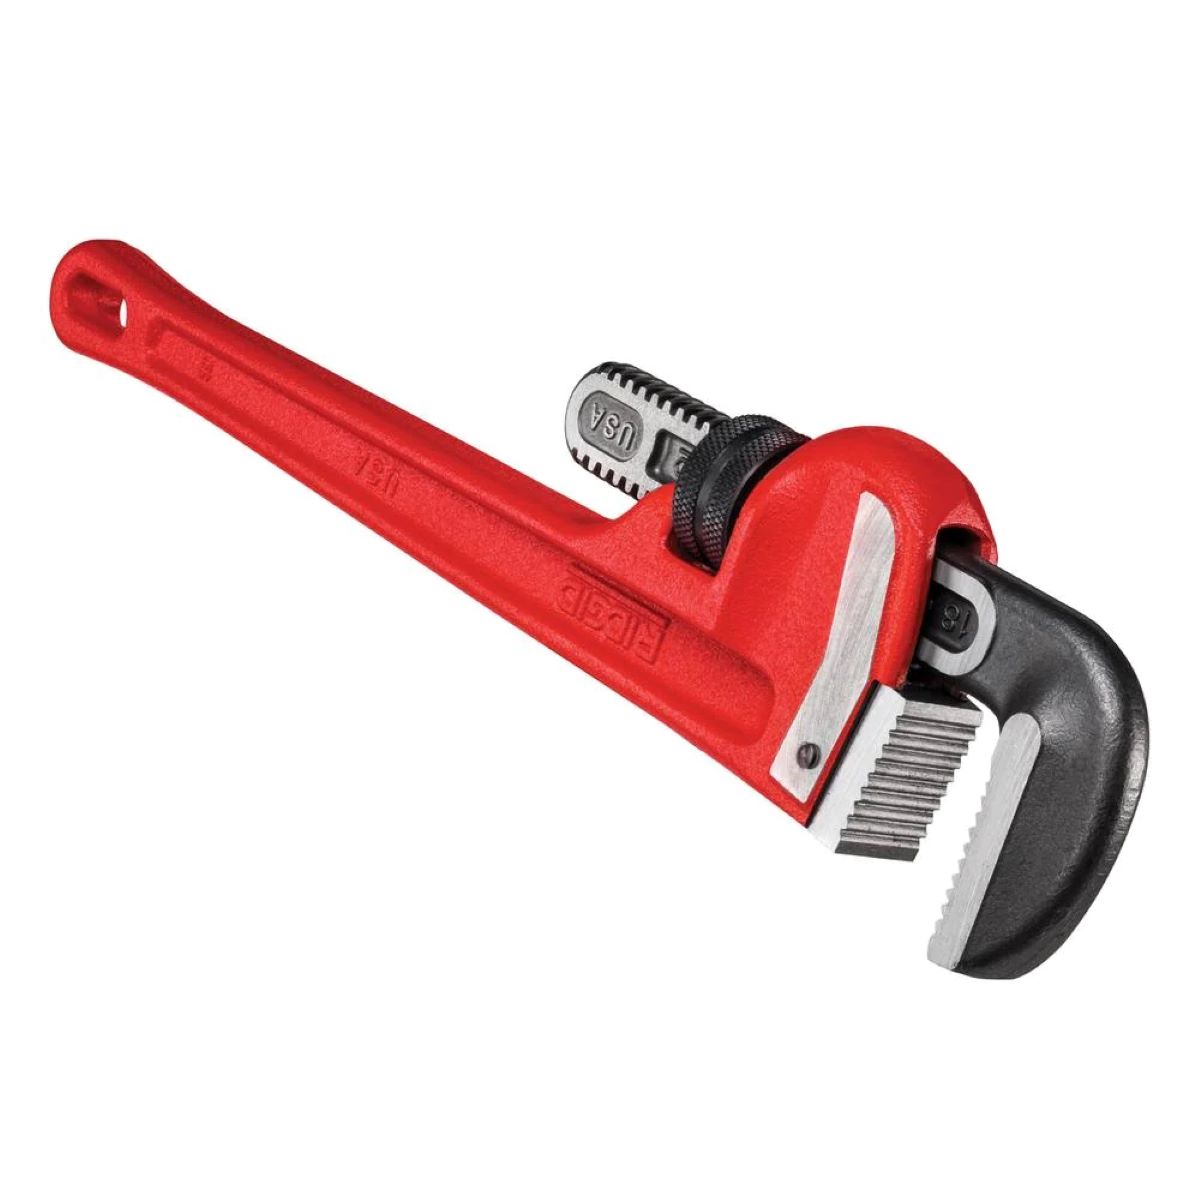 Who Sells Ridgid Hand Tools In Asheville